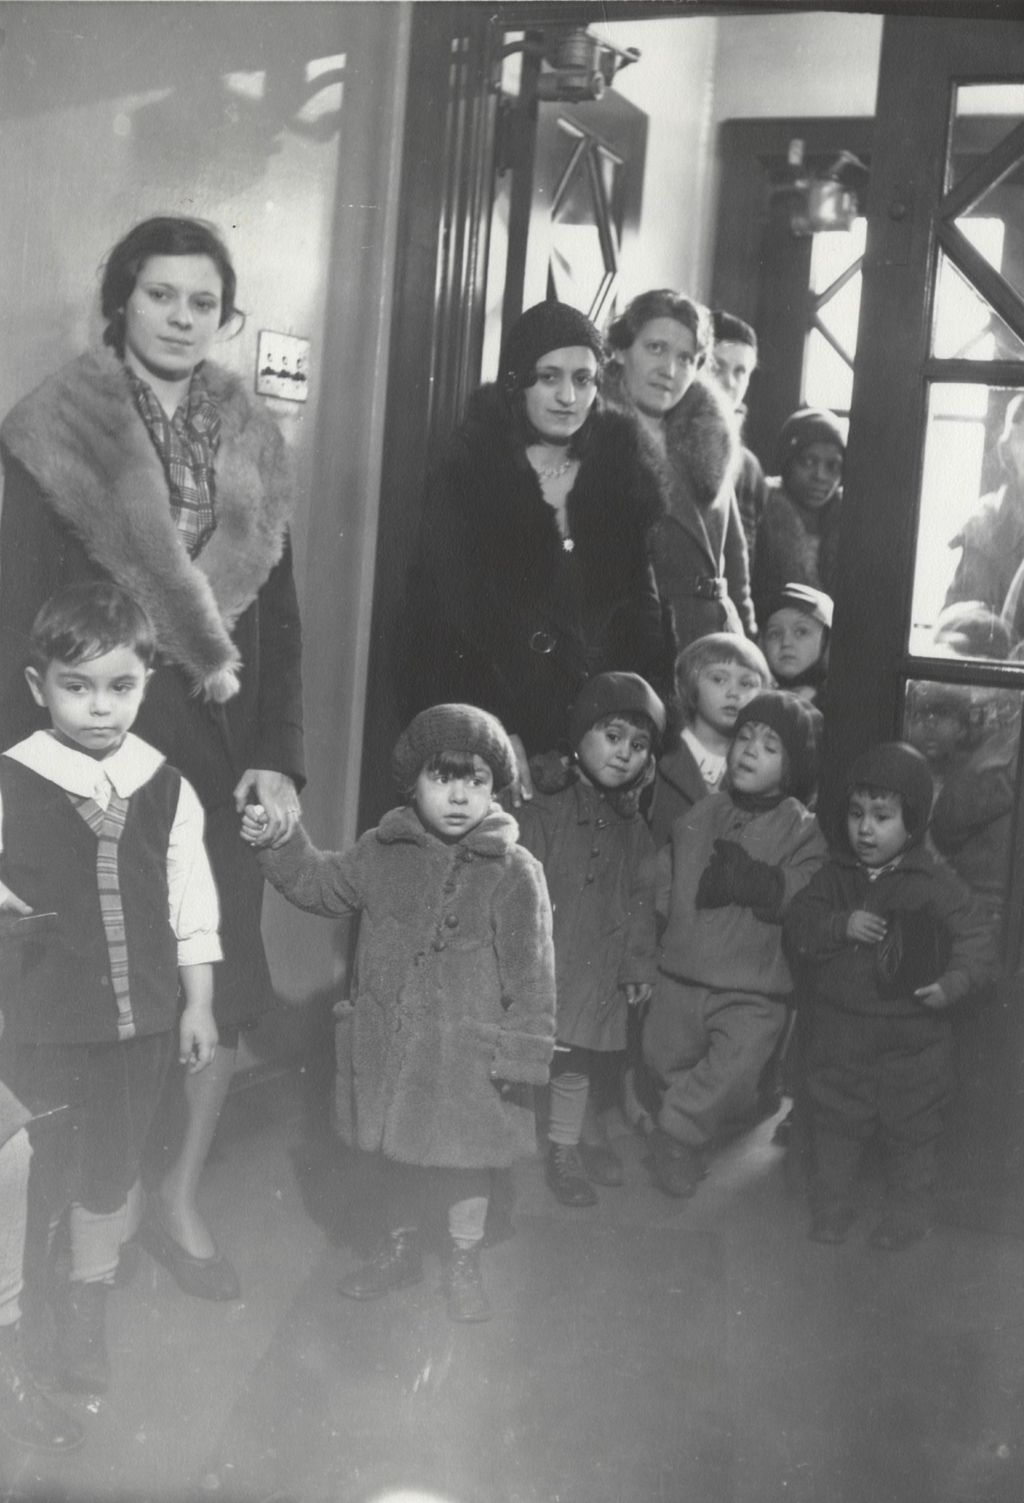 Mothers and children arriving at Hull-House nursery school